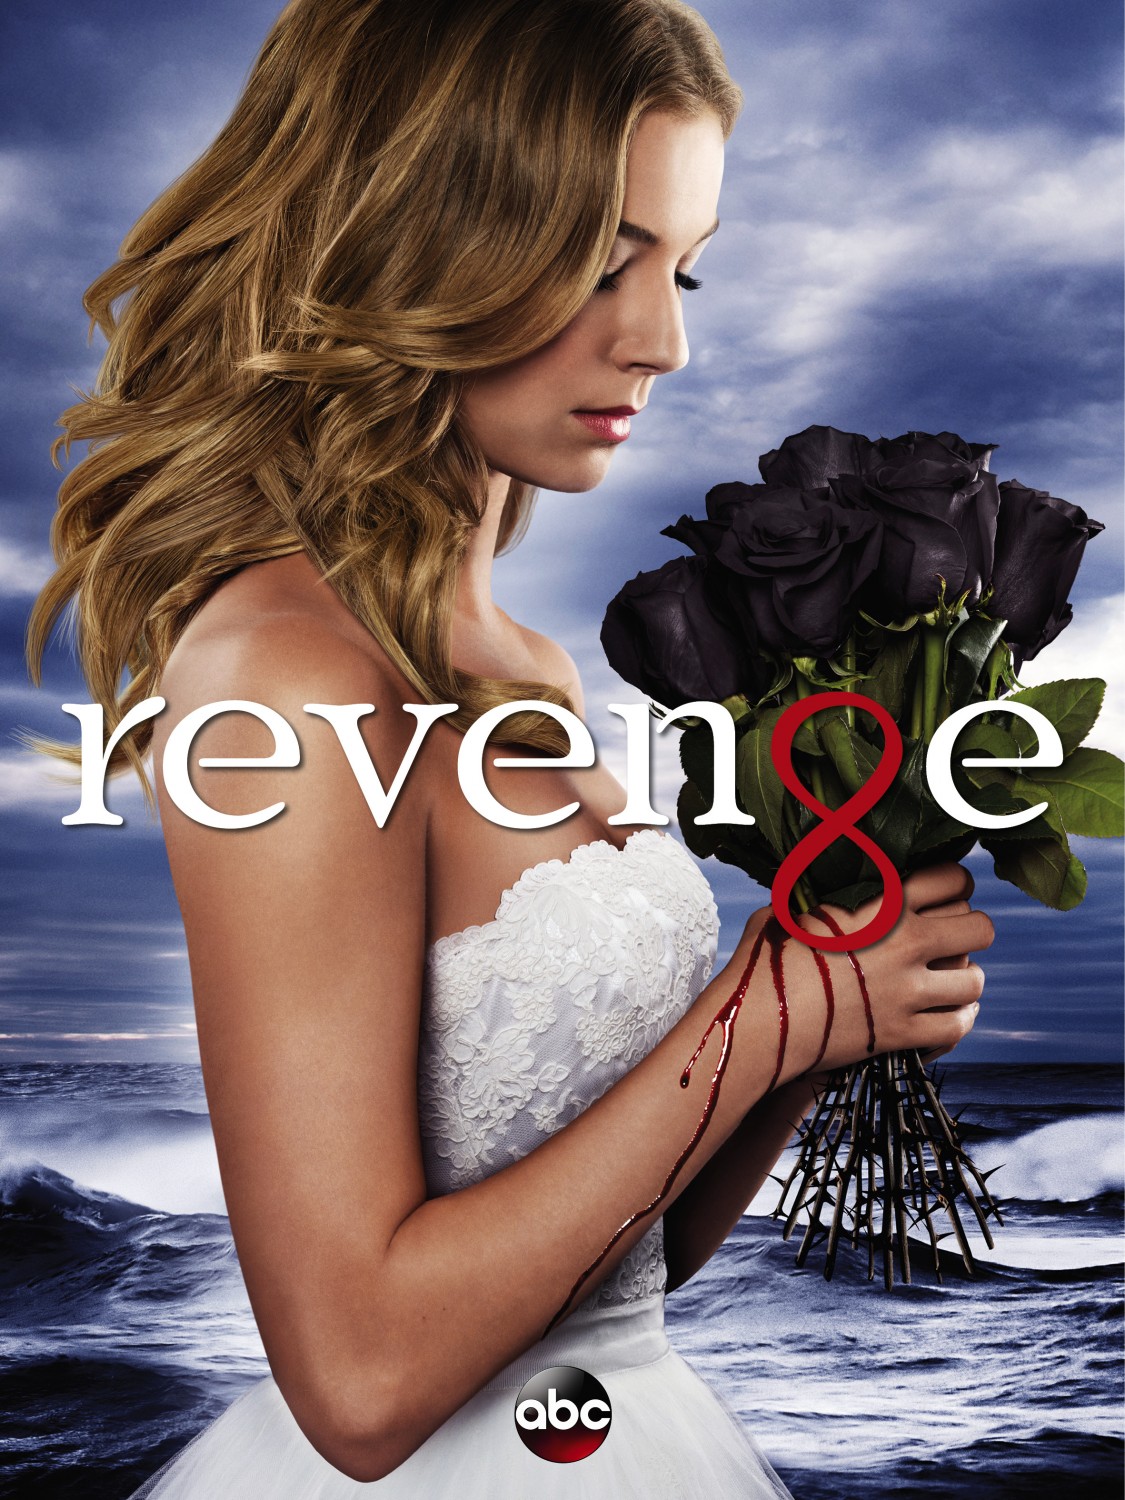 Extra Large TV Poster Image for Revenge (#3 of 4)